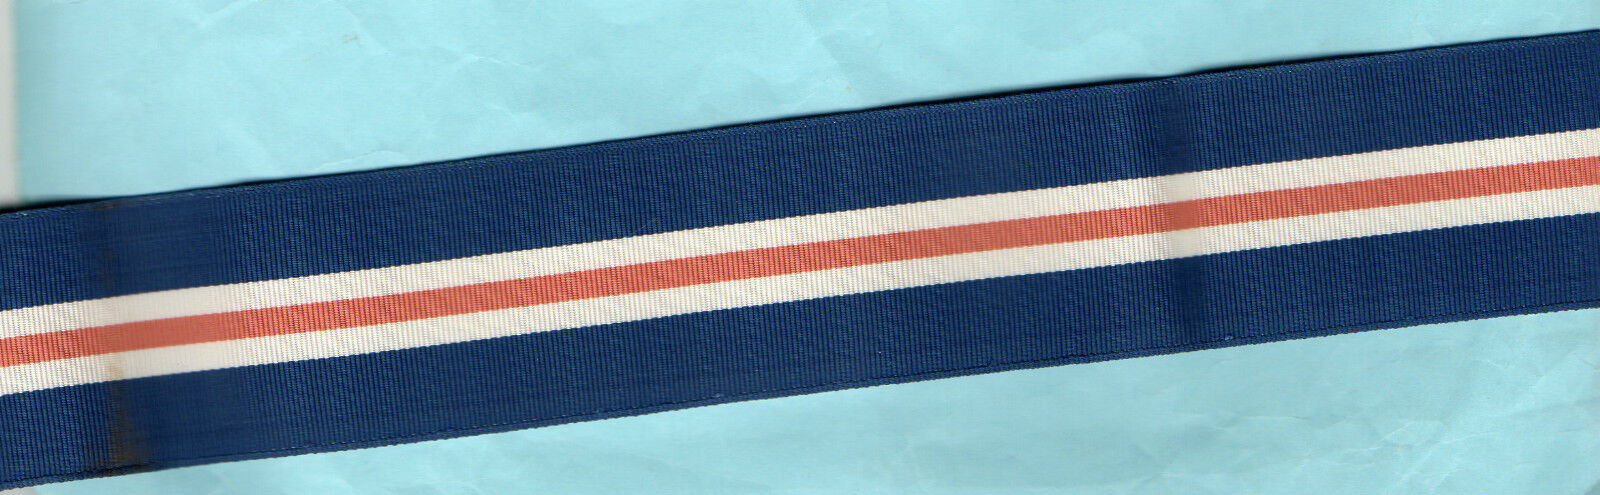 USA WWI CONNECTICUT  RIBBON NICE OLD SILK WEAVE -  FULL-SIZE 6 INCHES (15cm)